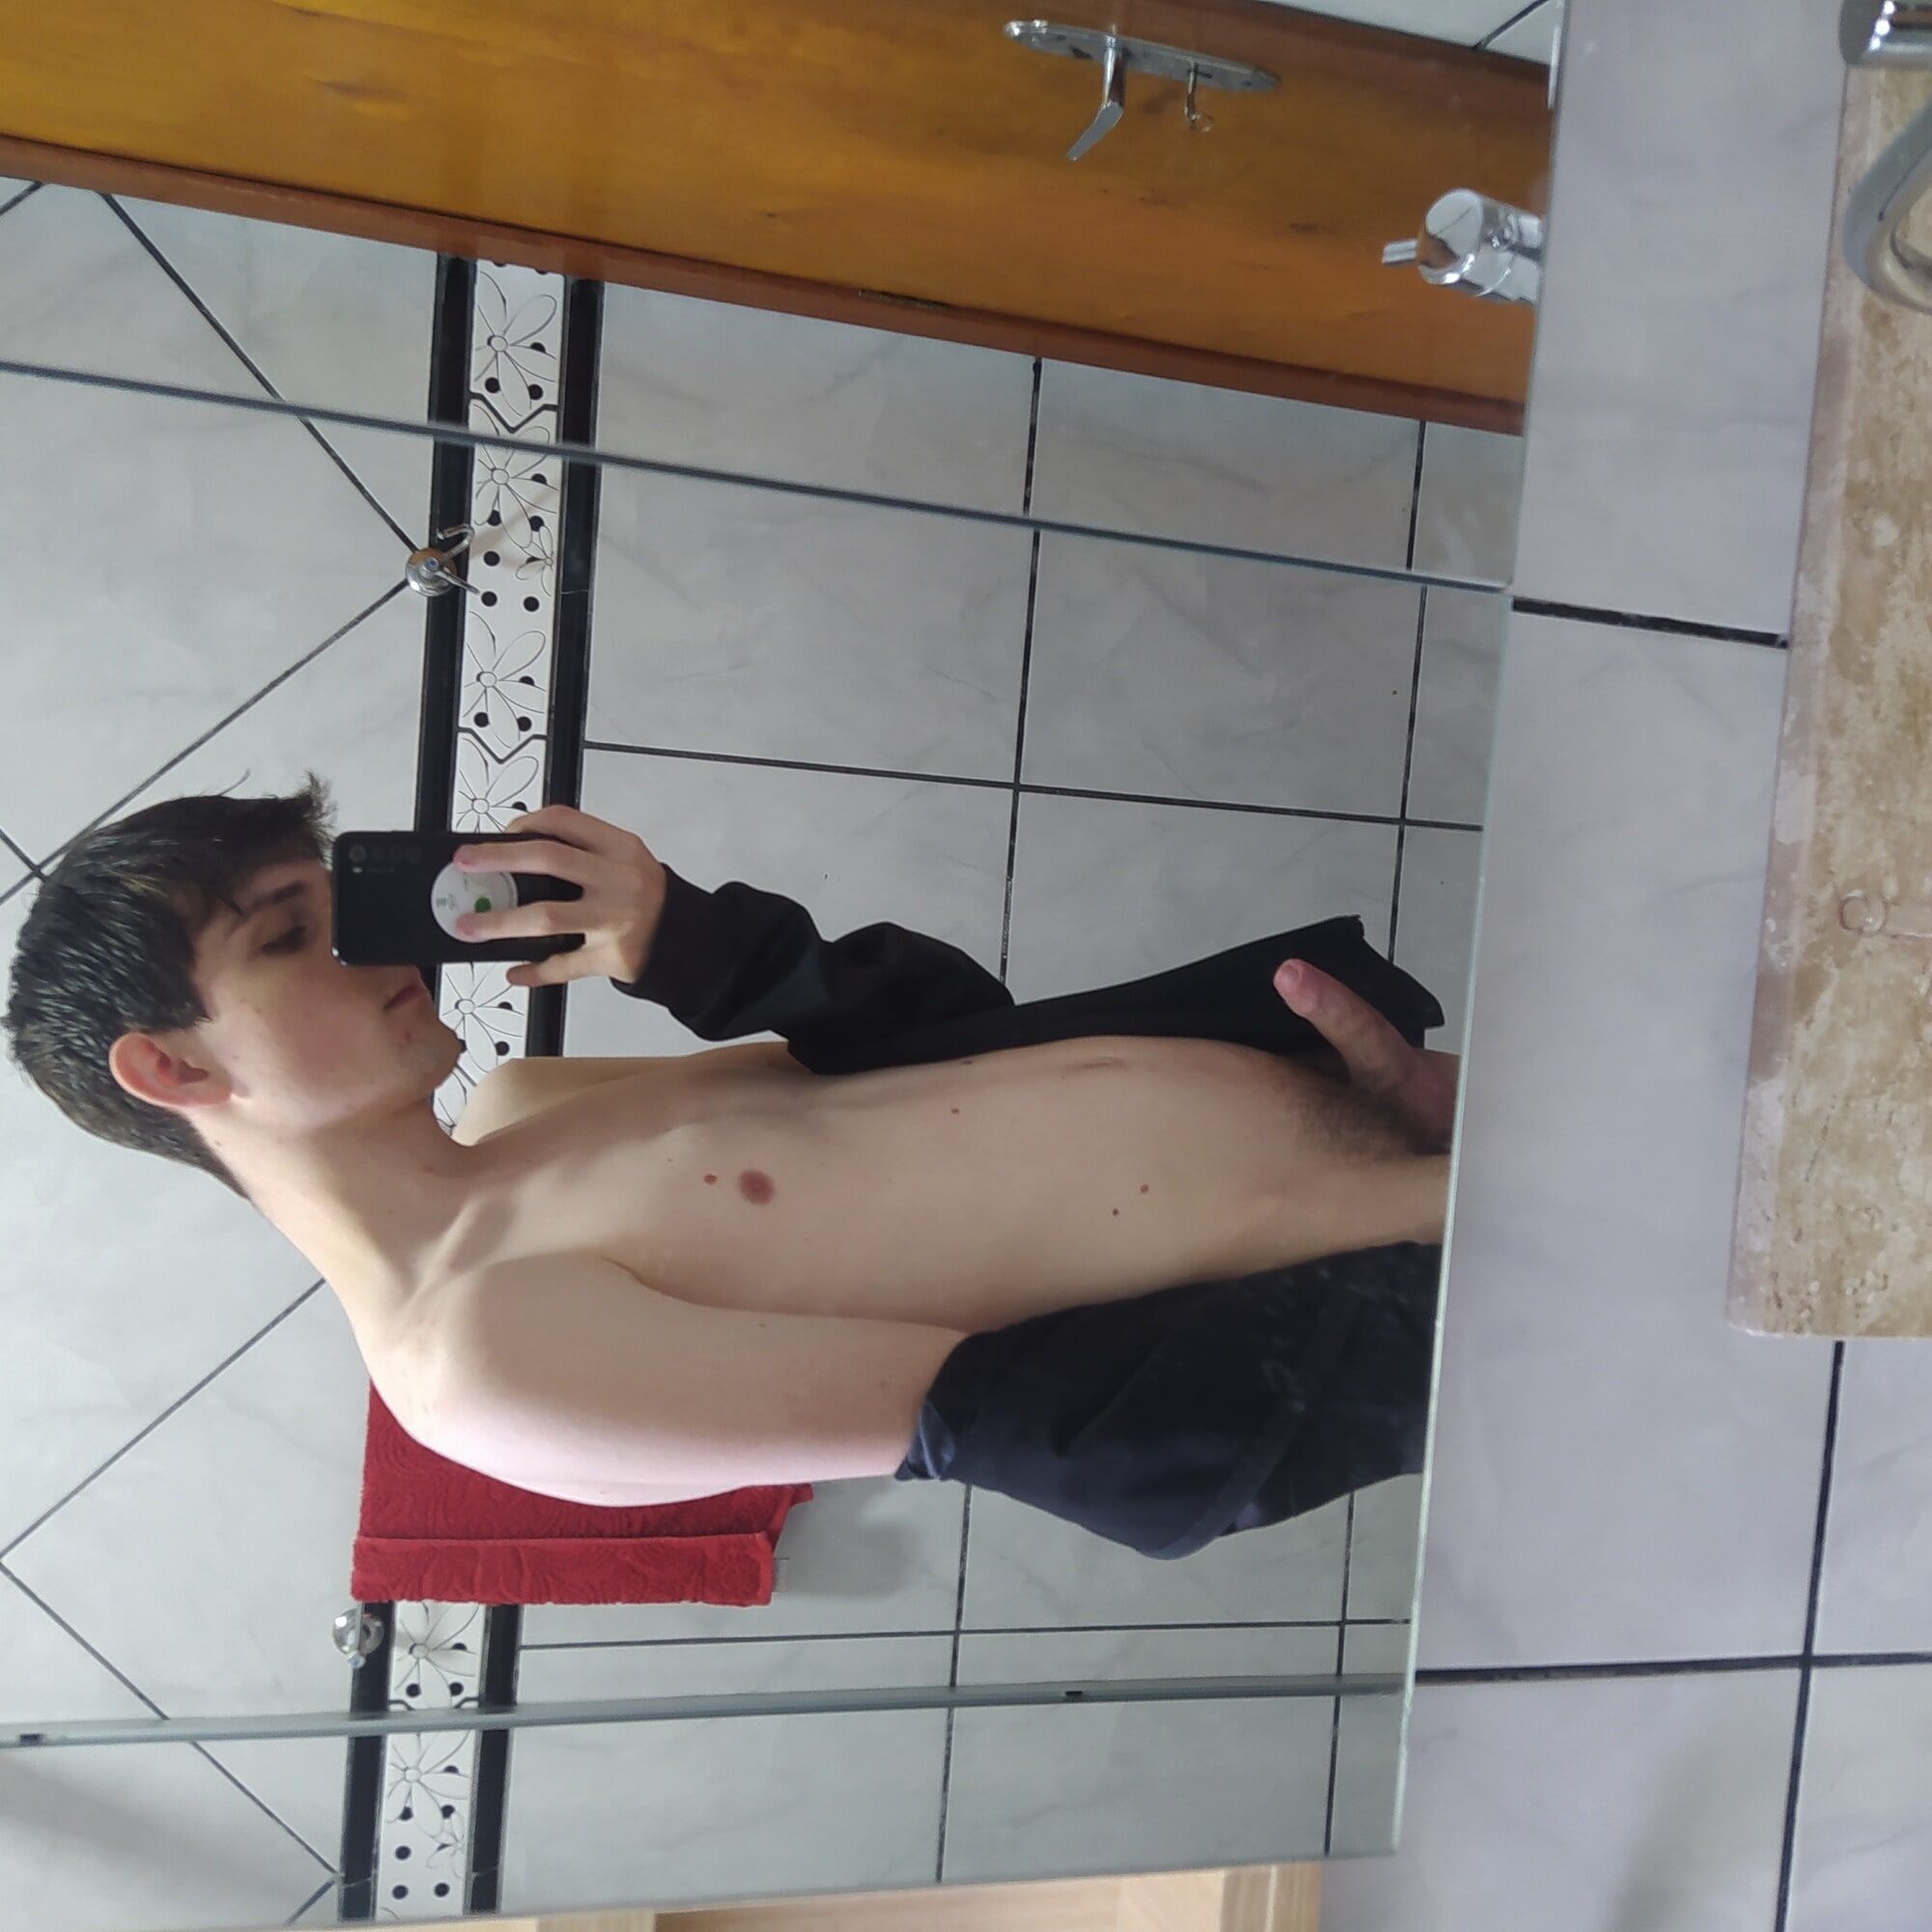 Boy showing off in the mirror #13